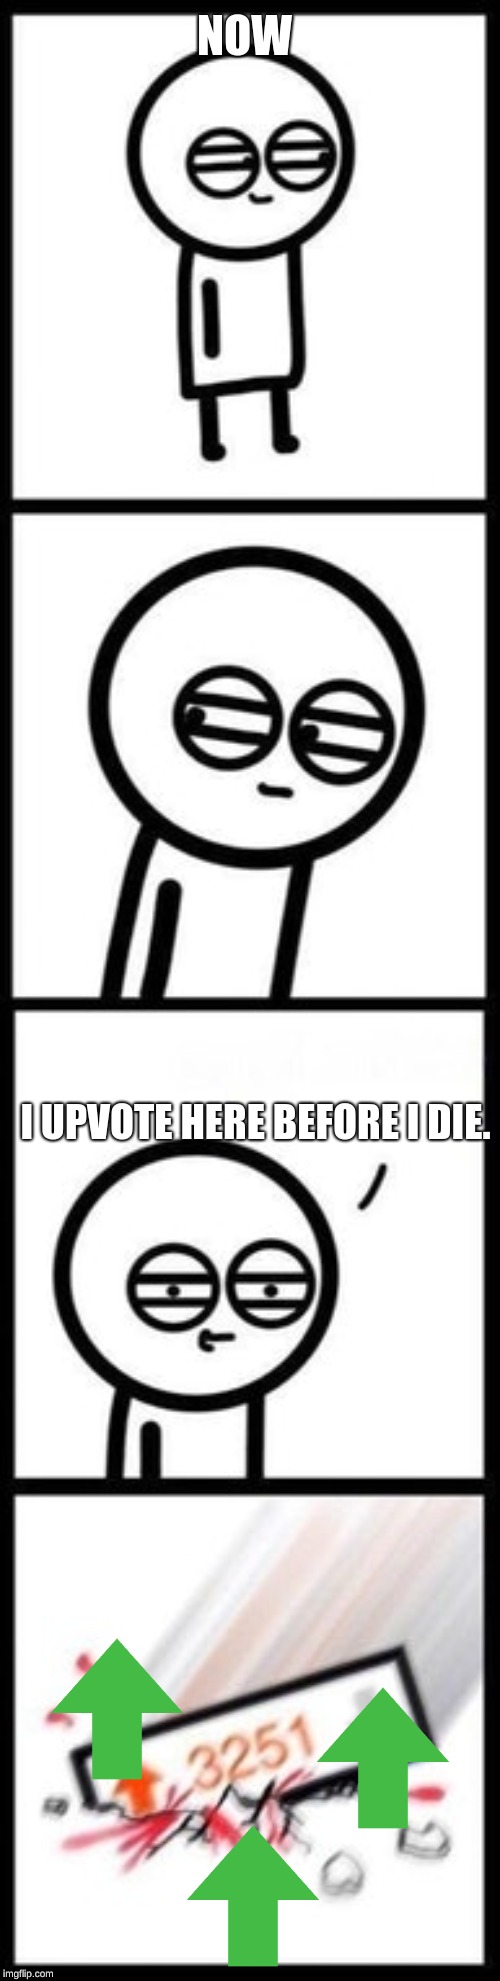 3251 upvotes | NOW I UPVOTE HERE BEFORE I DIE. | image tagged in 3251 upvotes | made w/ Imgflip meme maker